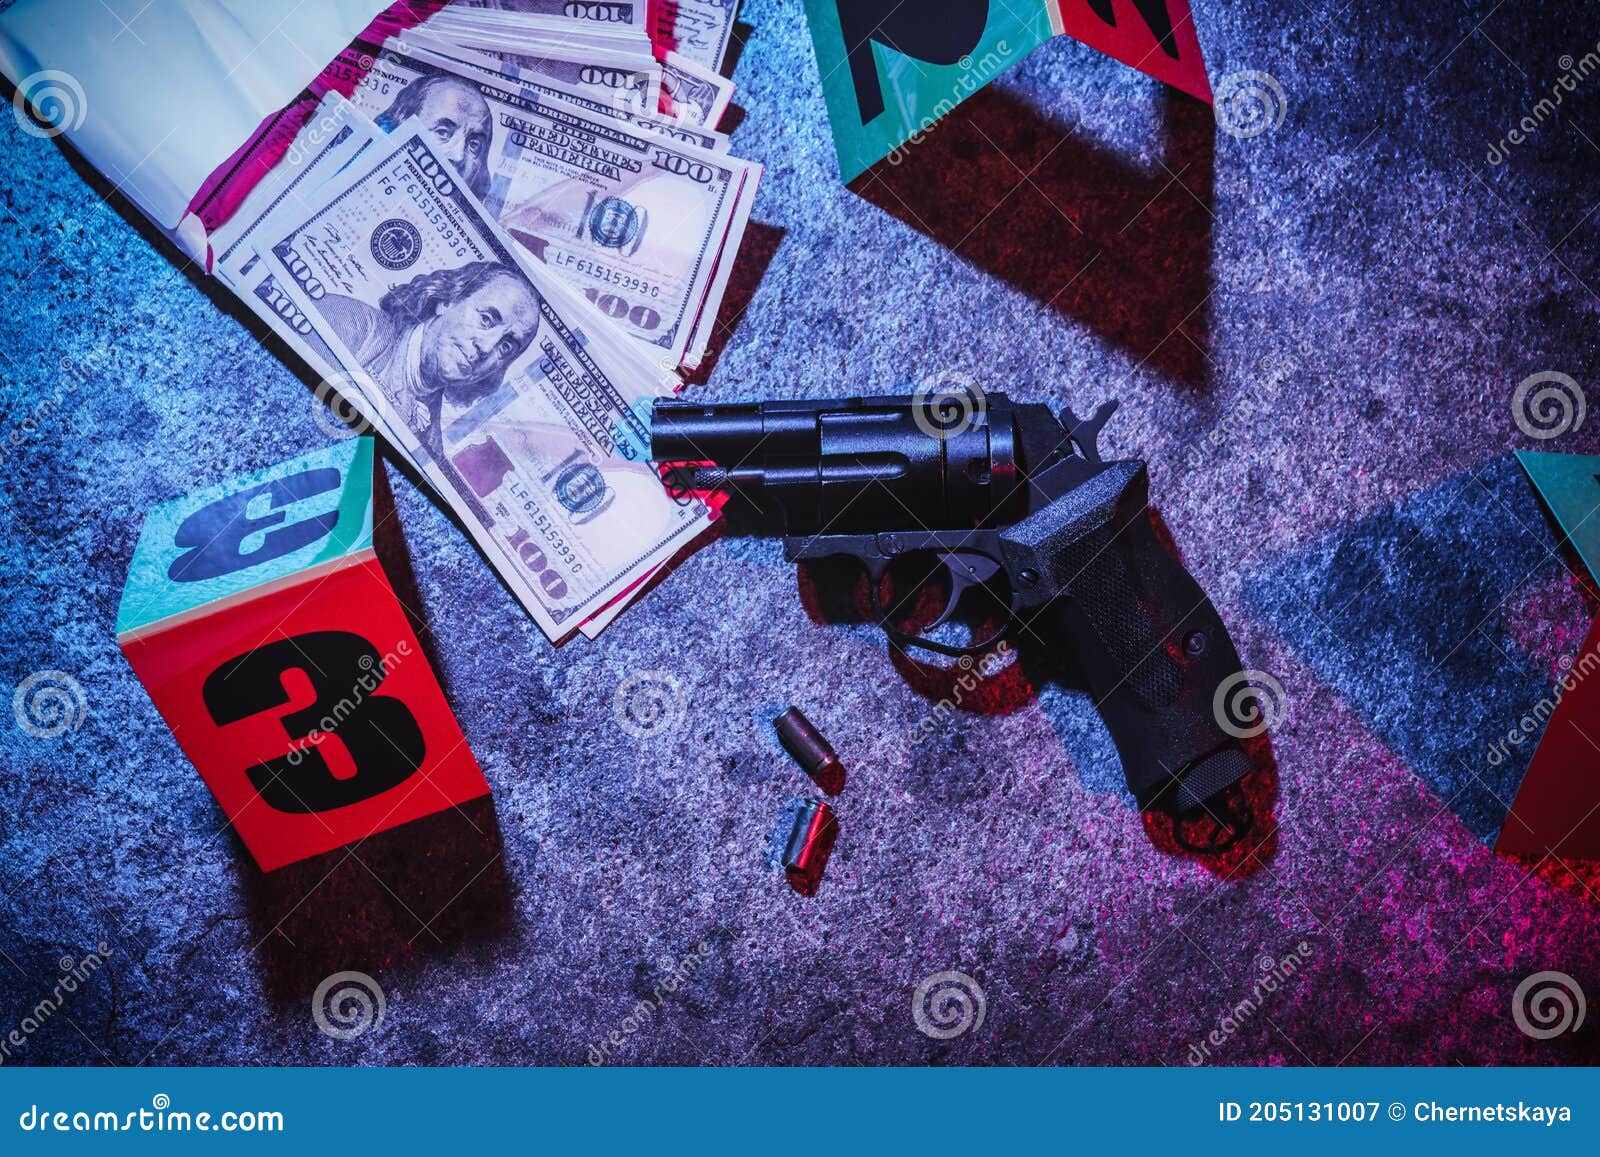 evidences and crime scene marker on stone background, toned in red and blue. flat lay